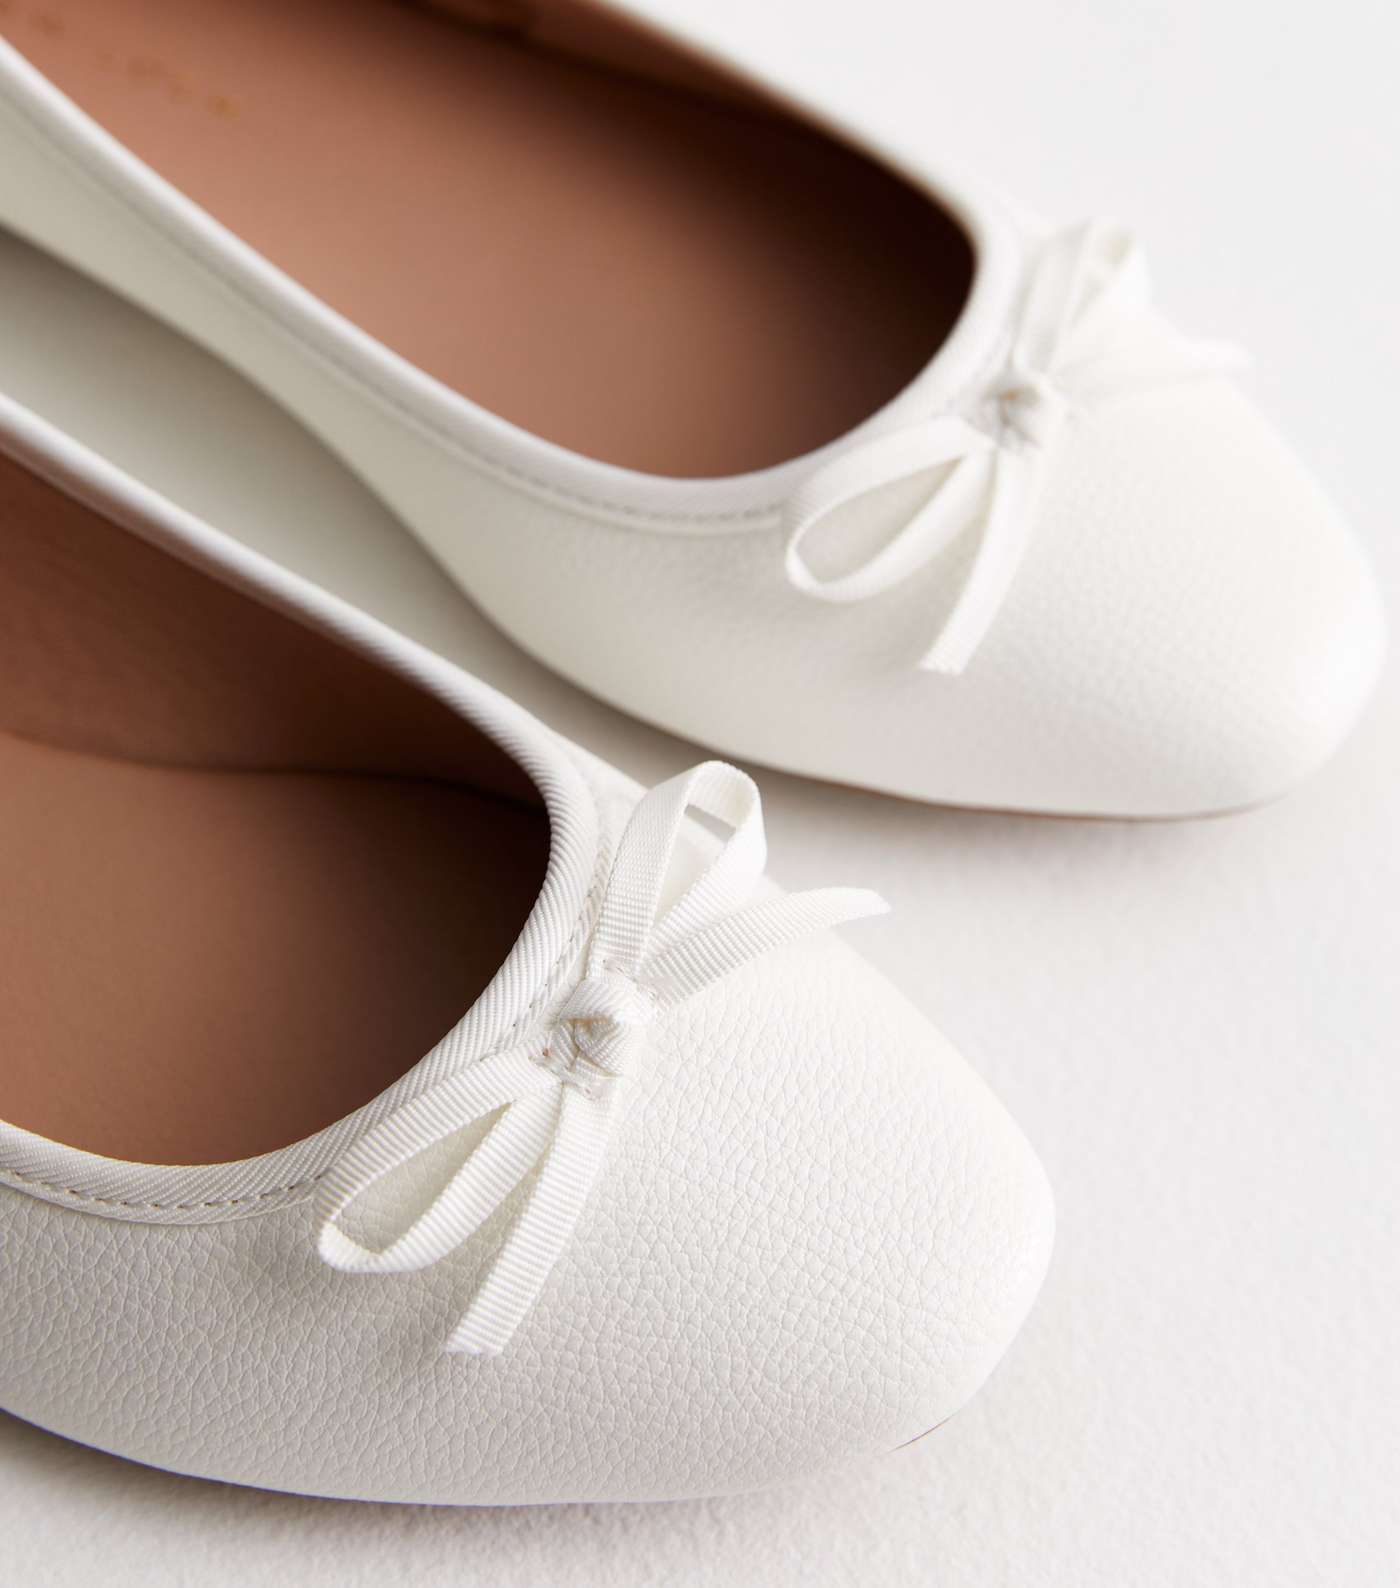 Wide Fit White Leather-Look Ballerina Pumps Image 4